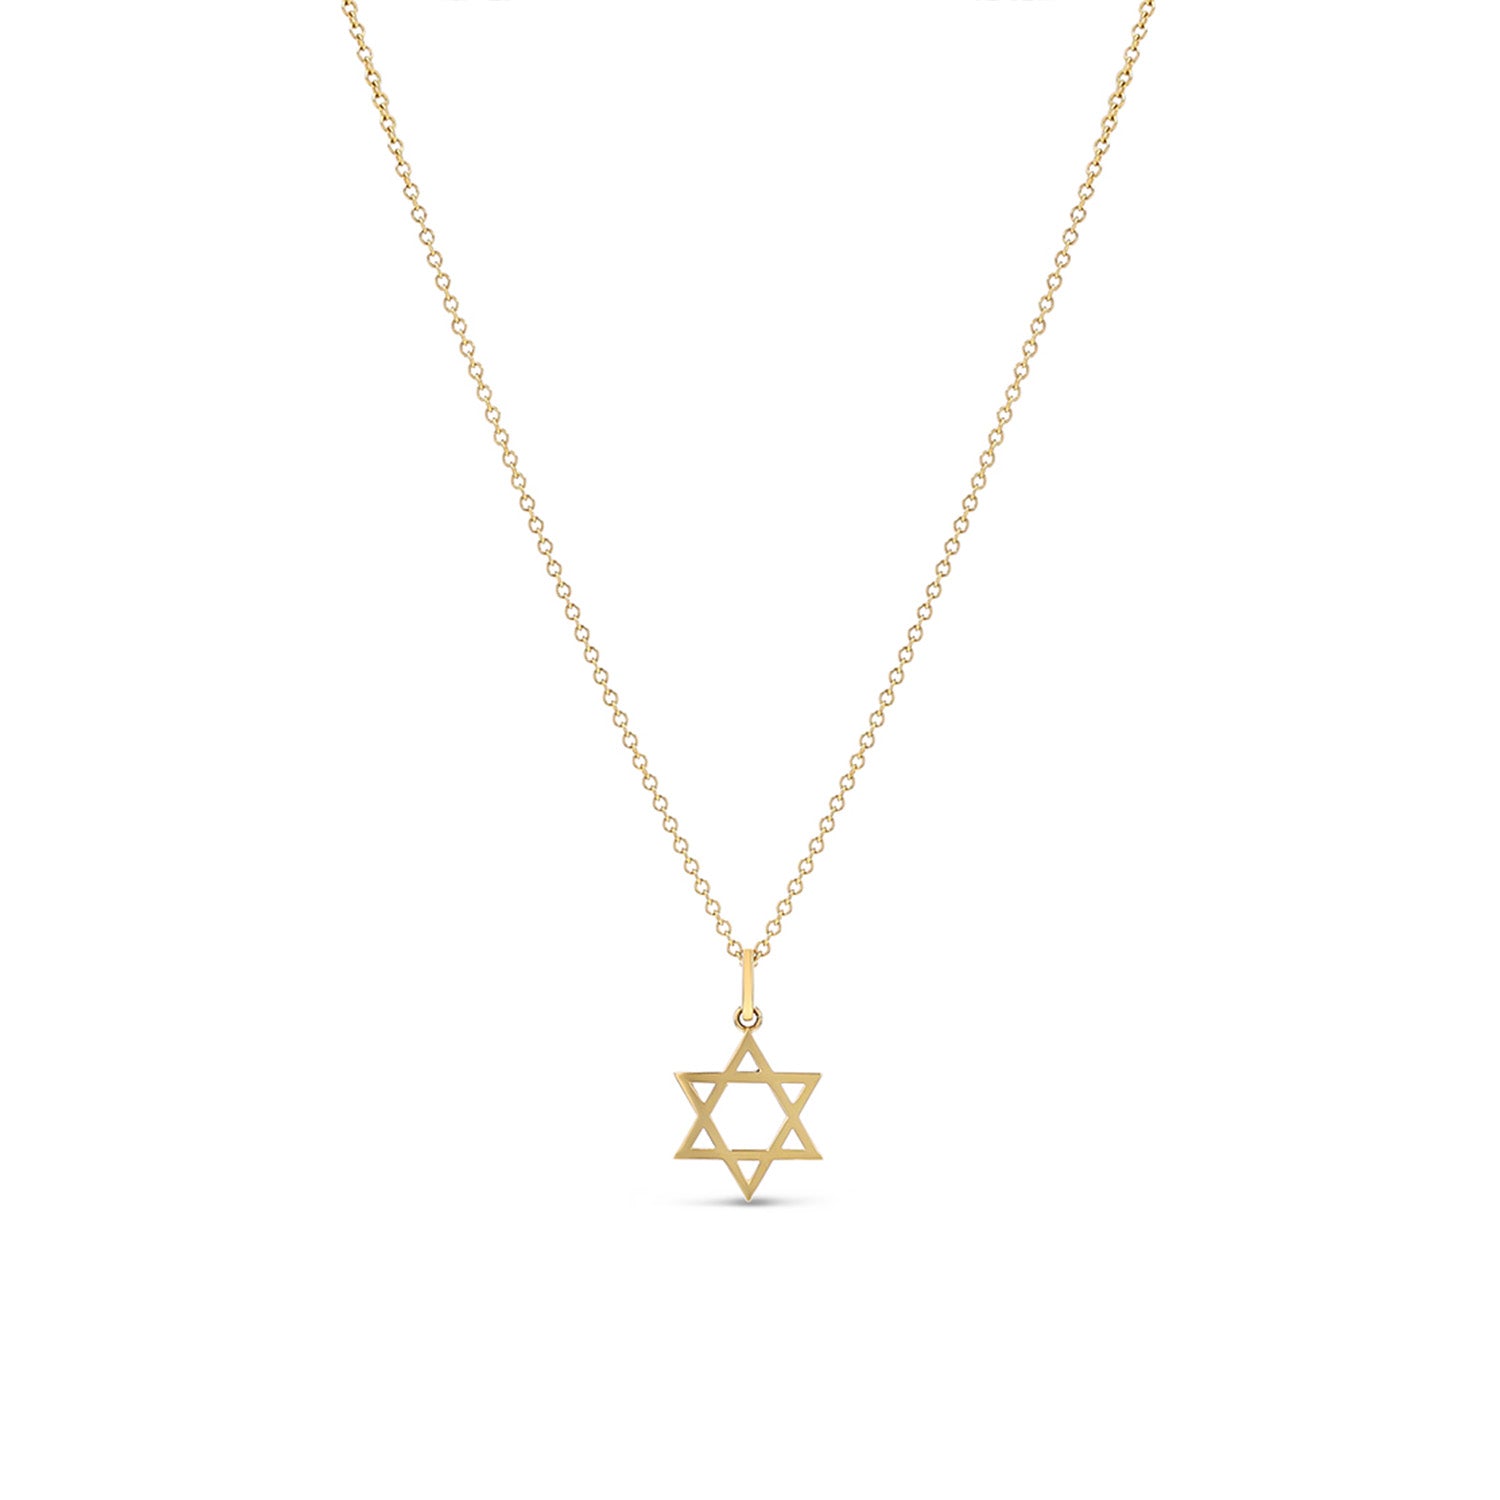 14k Gold 18mm Star of David Pendant on Link Chain Necklace